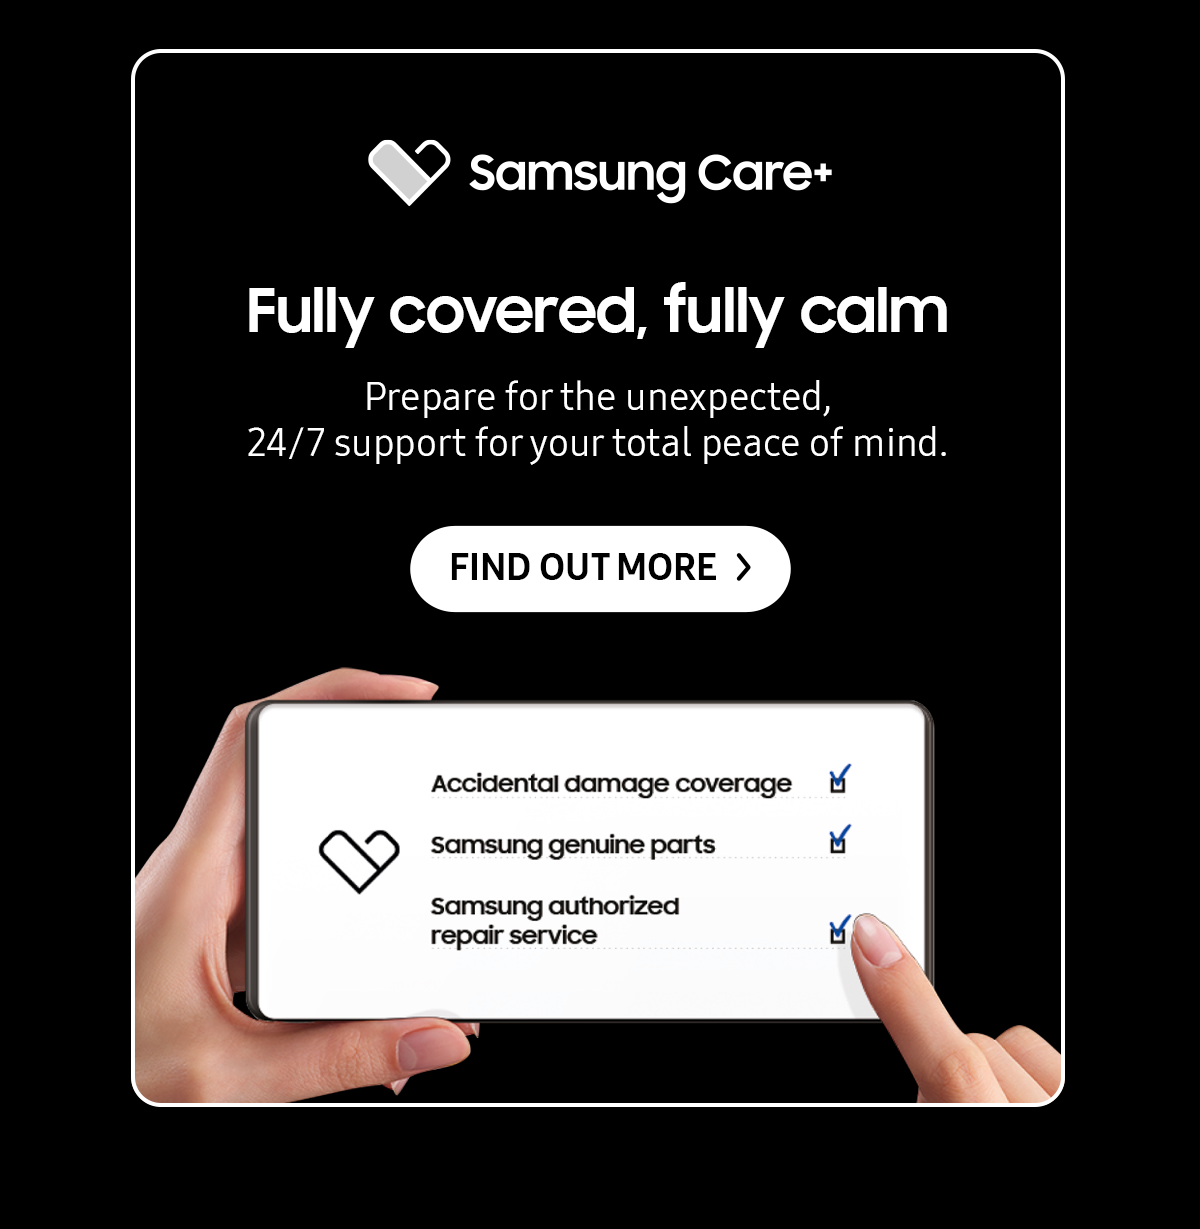 Samsung Care+ - Fully covered, fully calm